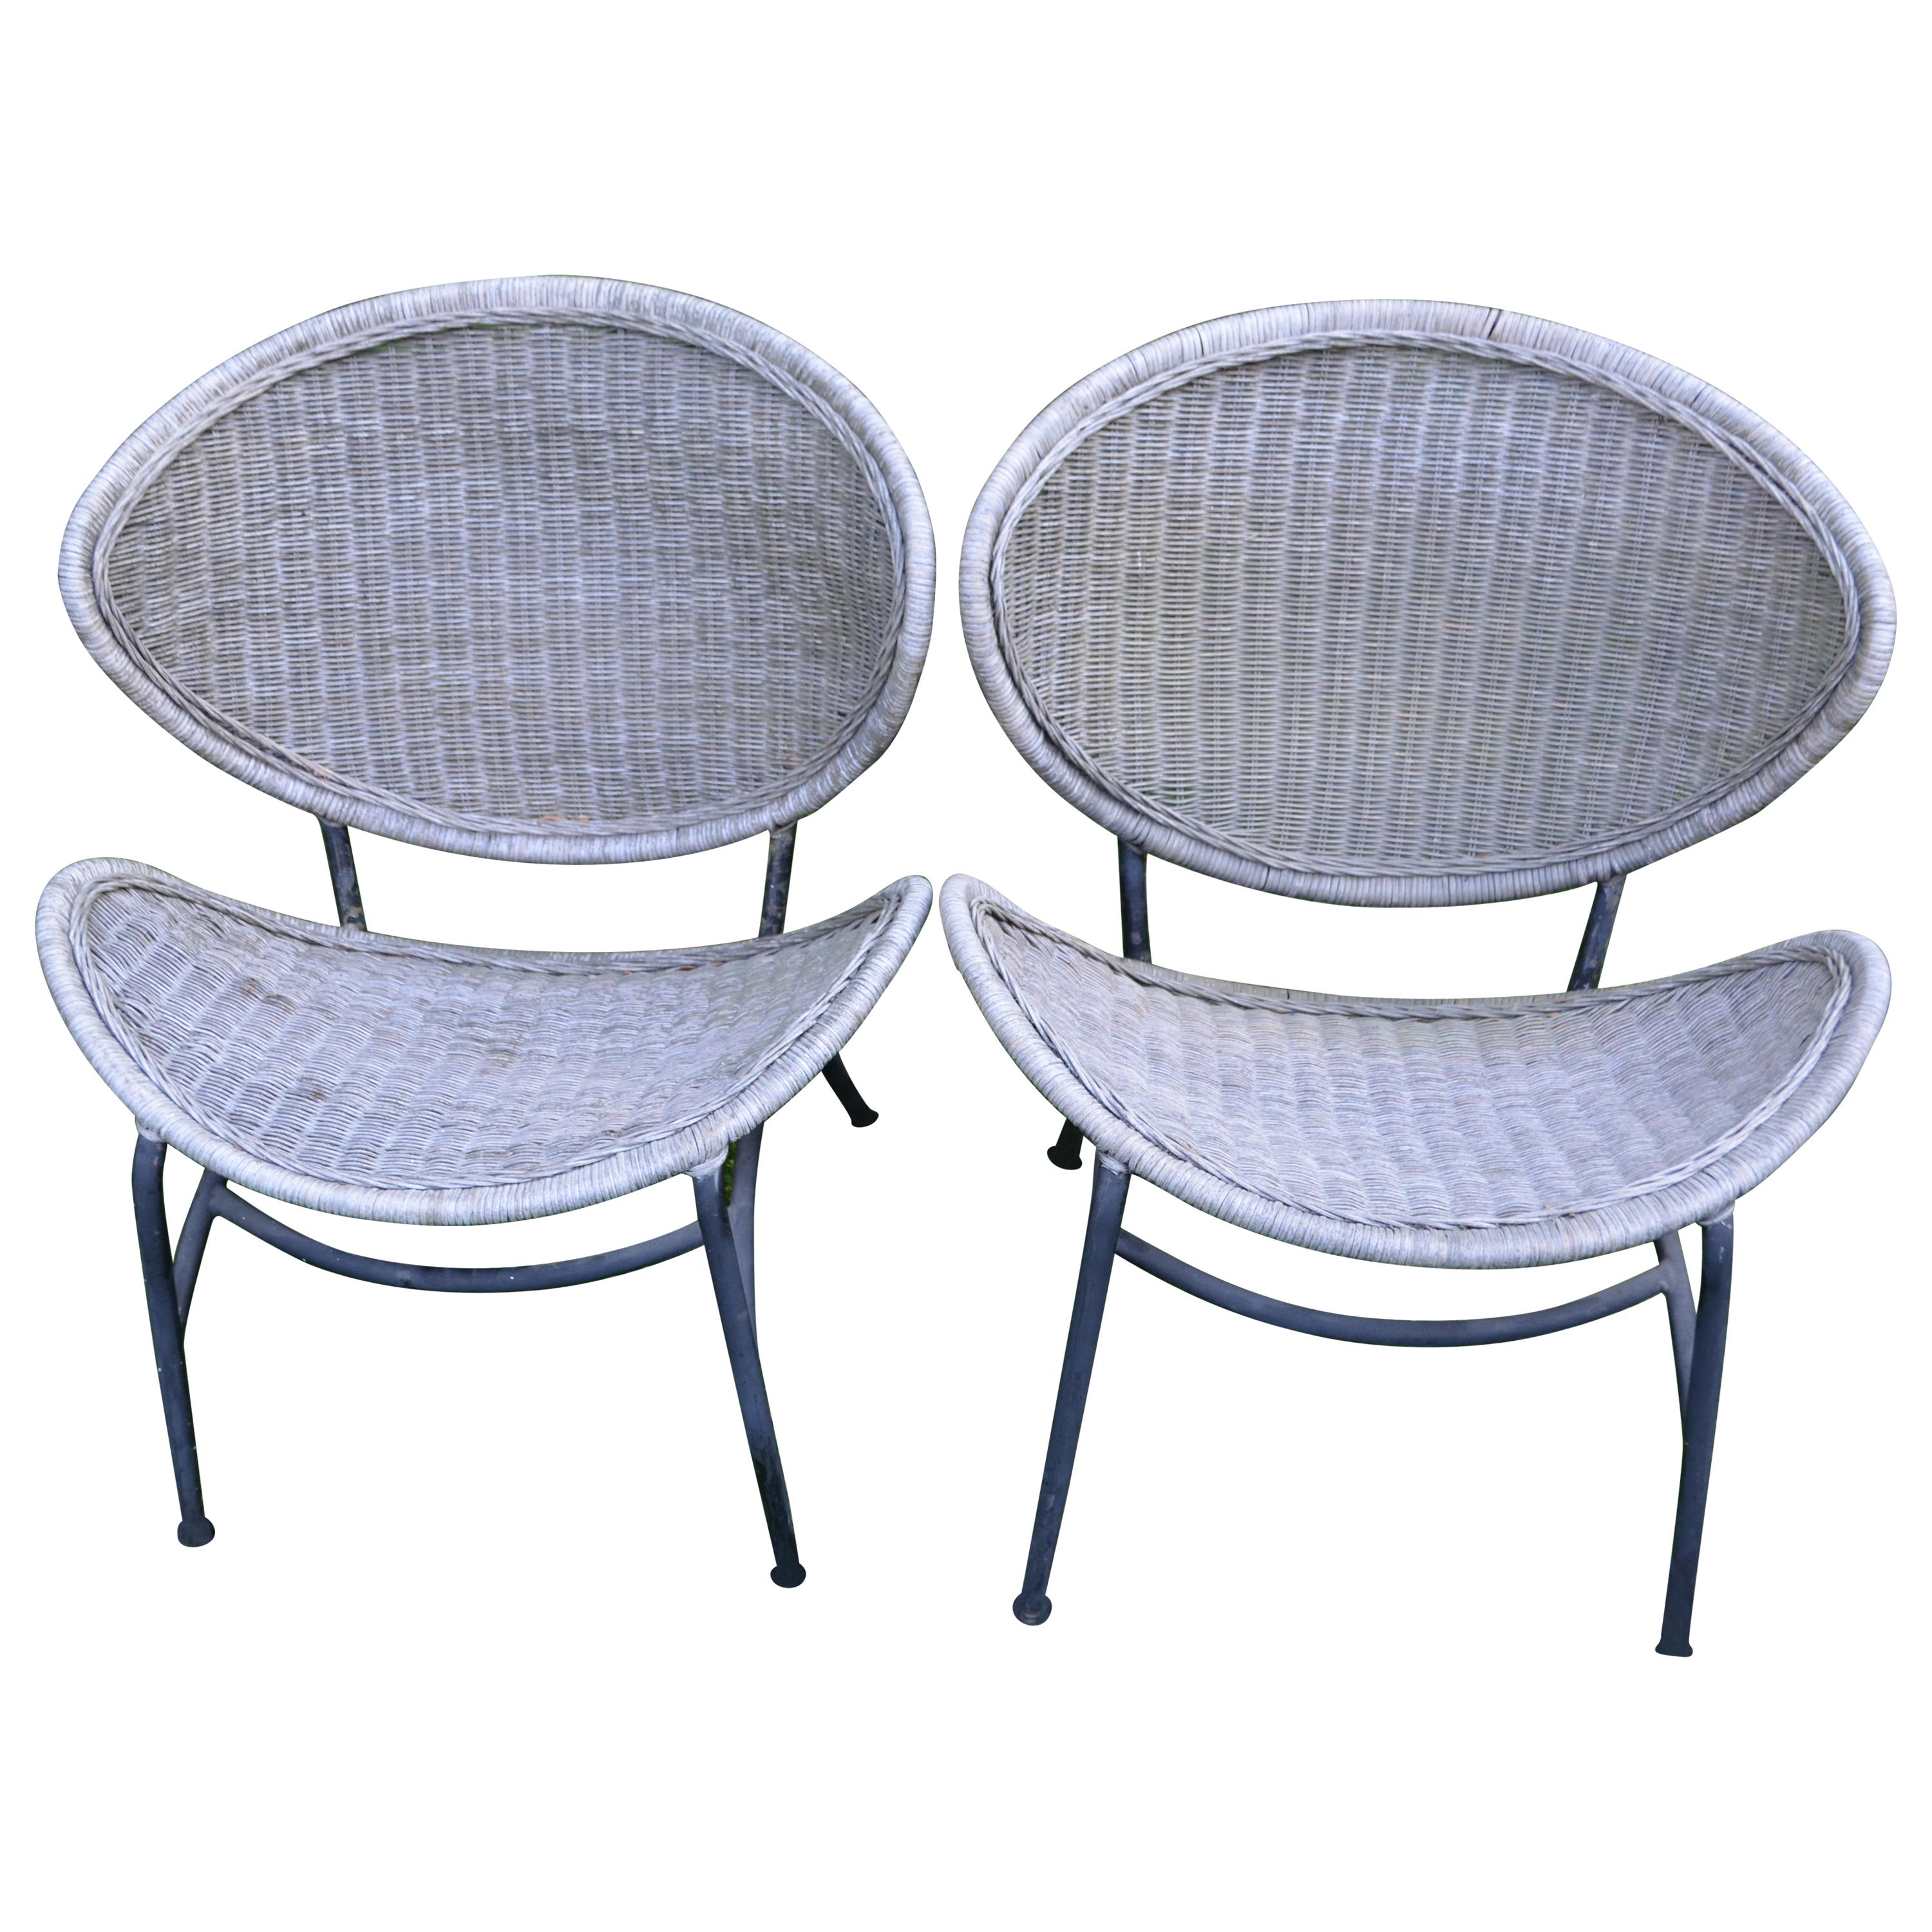 Salterini Wicker Clamshell Chairs, Pair, with Steel Frame for Home, Patio, Porch